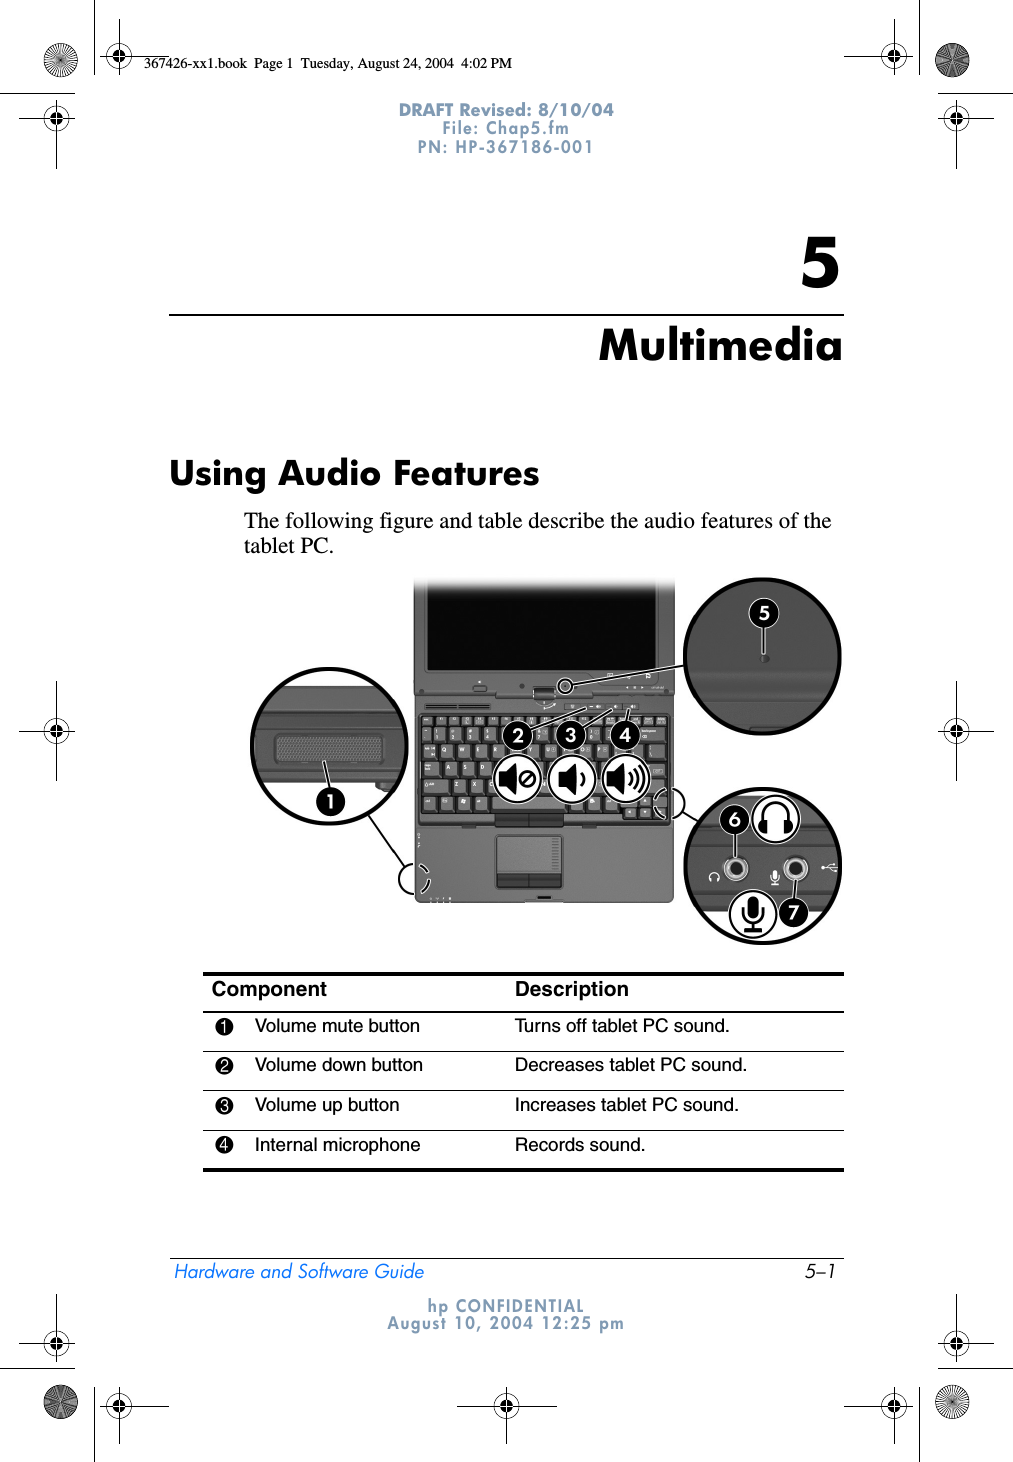 Hardware and Software Guide 5–1DRAFT Revised: 8/10/04File: Chap5.fm PN: HP-367186-001 hp CONFIDENTIALAugust 10, 2004 12:25 pm5MultimediaUsing Audio FeaturesThe following figure and table describe the audio features of the tablet PC.Component Description1Volume mute button Turns off tablet PC sound.2Volume down button Decreases tablet PC sound.3Volume up button Increases tablet PC sound.4Internal microphone Records sound.367426-xx1.book  Page 1  Tuesday, August 24, 2004  4:02 PM